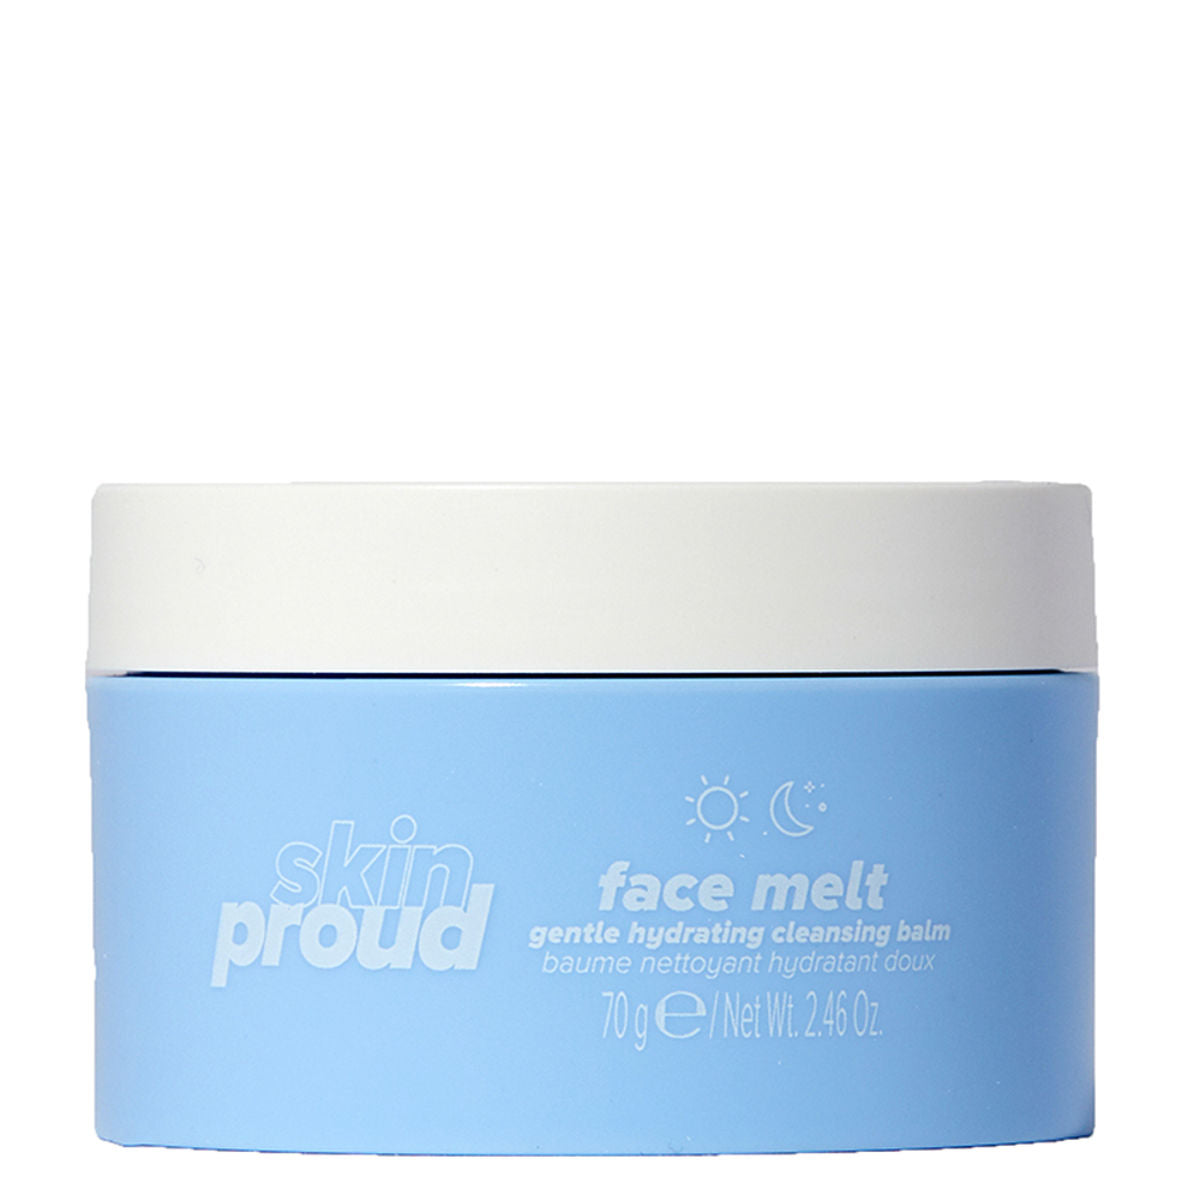 SKINPROUD Face Melt Gentle Hydrating Cleansing Balm